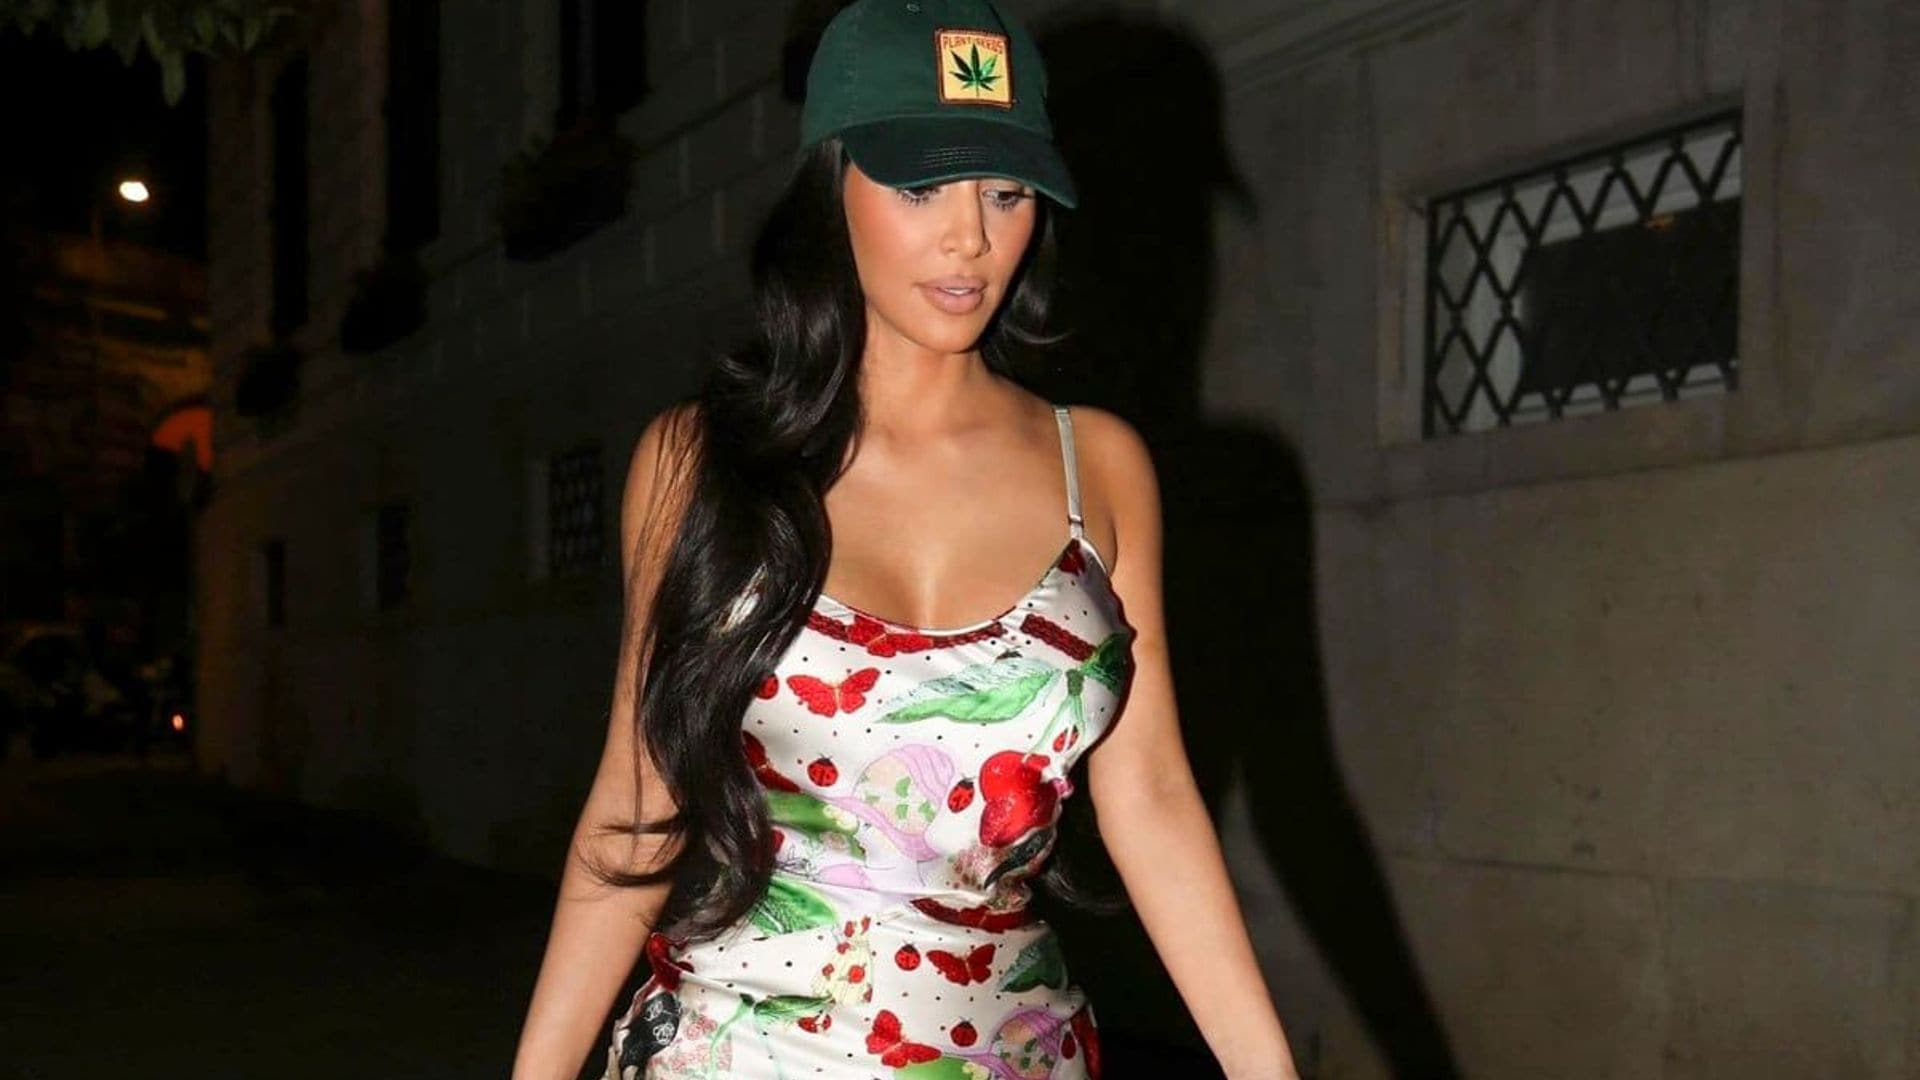 Kim Kardashian rocked a cherry-printed minidress and trucker hat for a night out in Rome